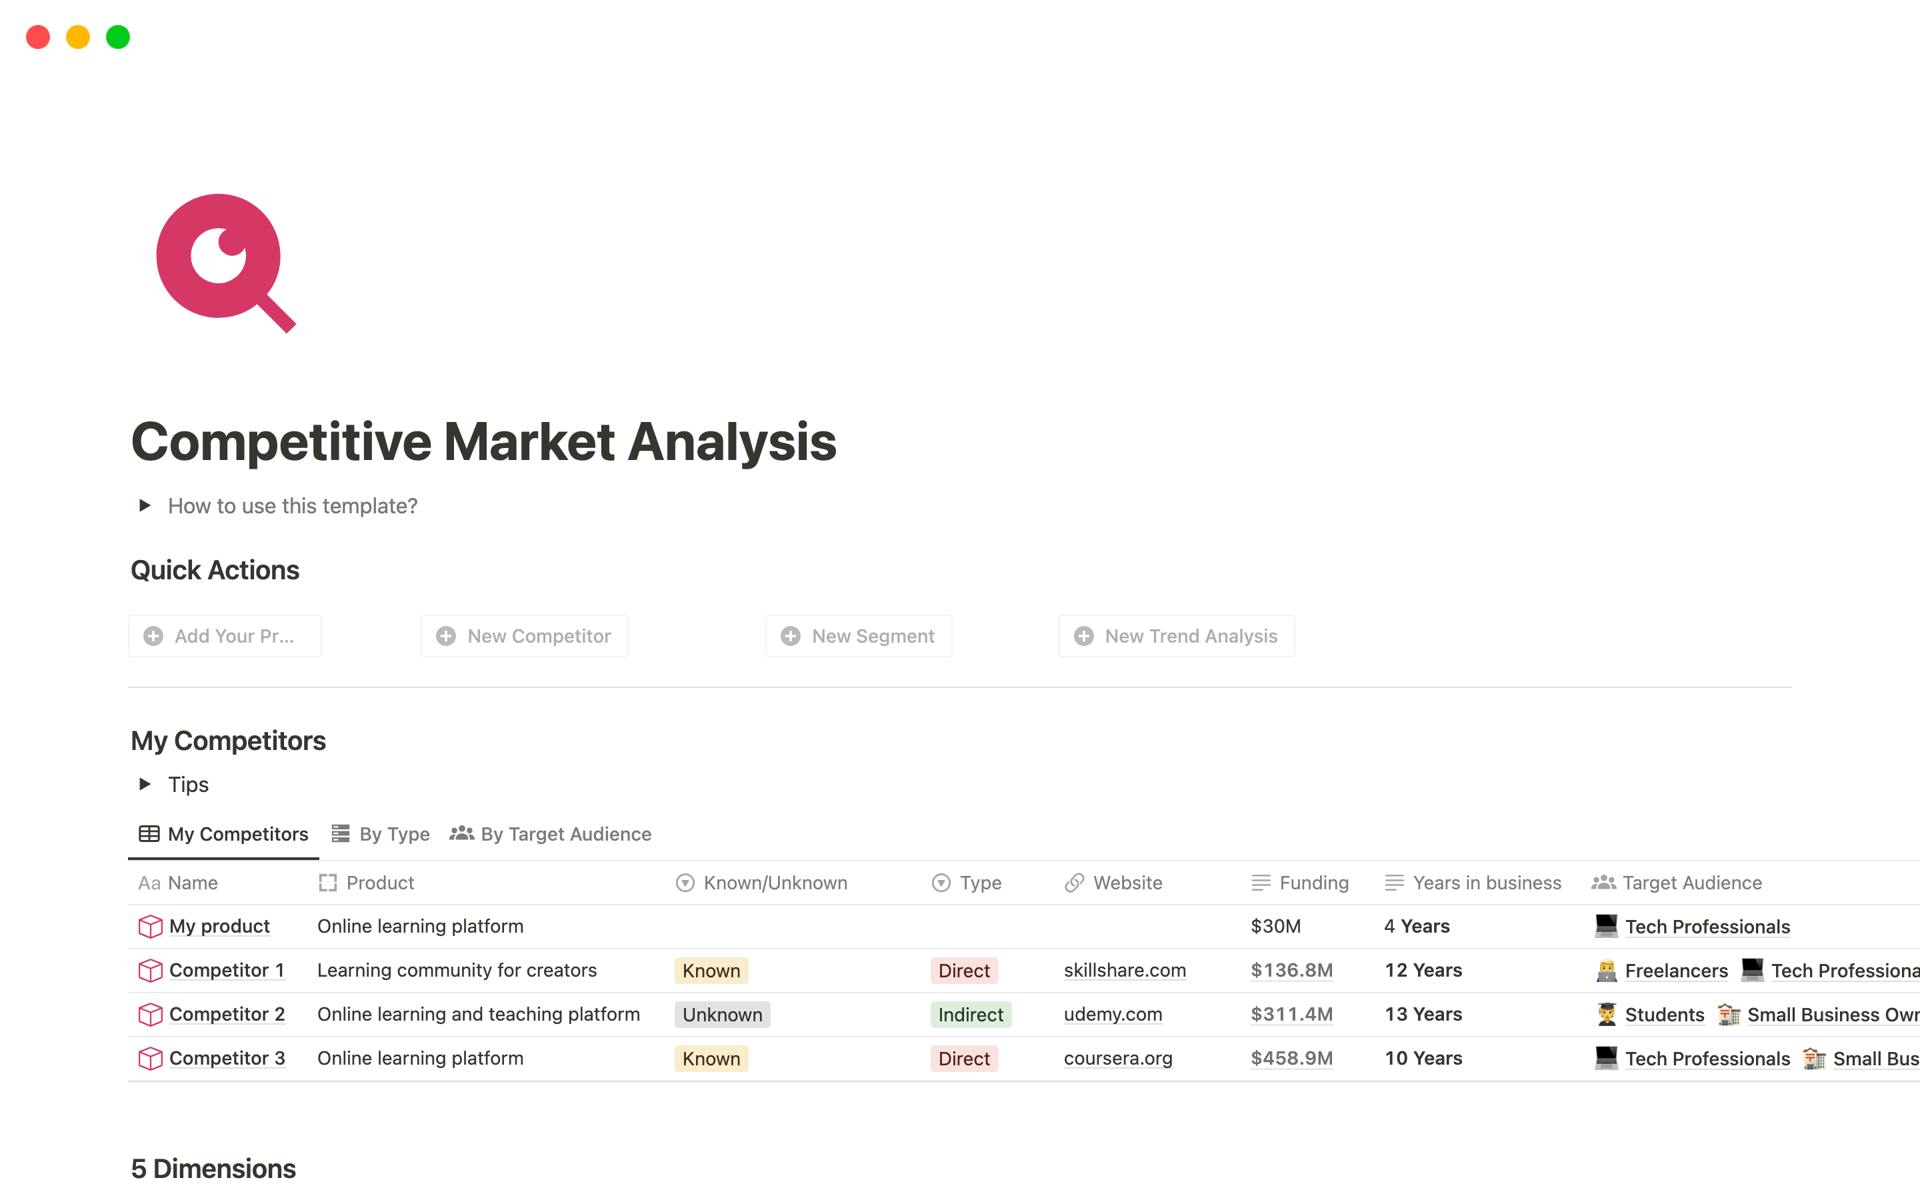 Competitive Market Analysis Notion Template helps capture and track how your product is competing with others.